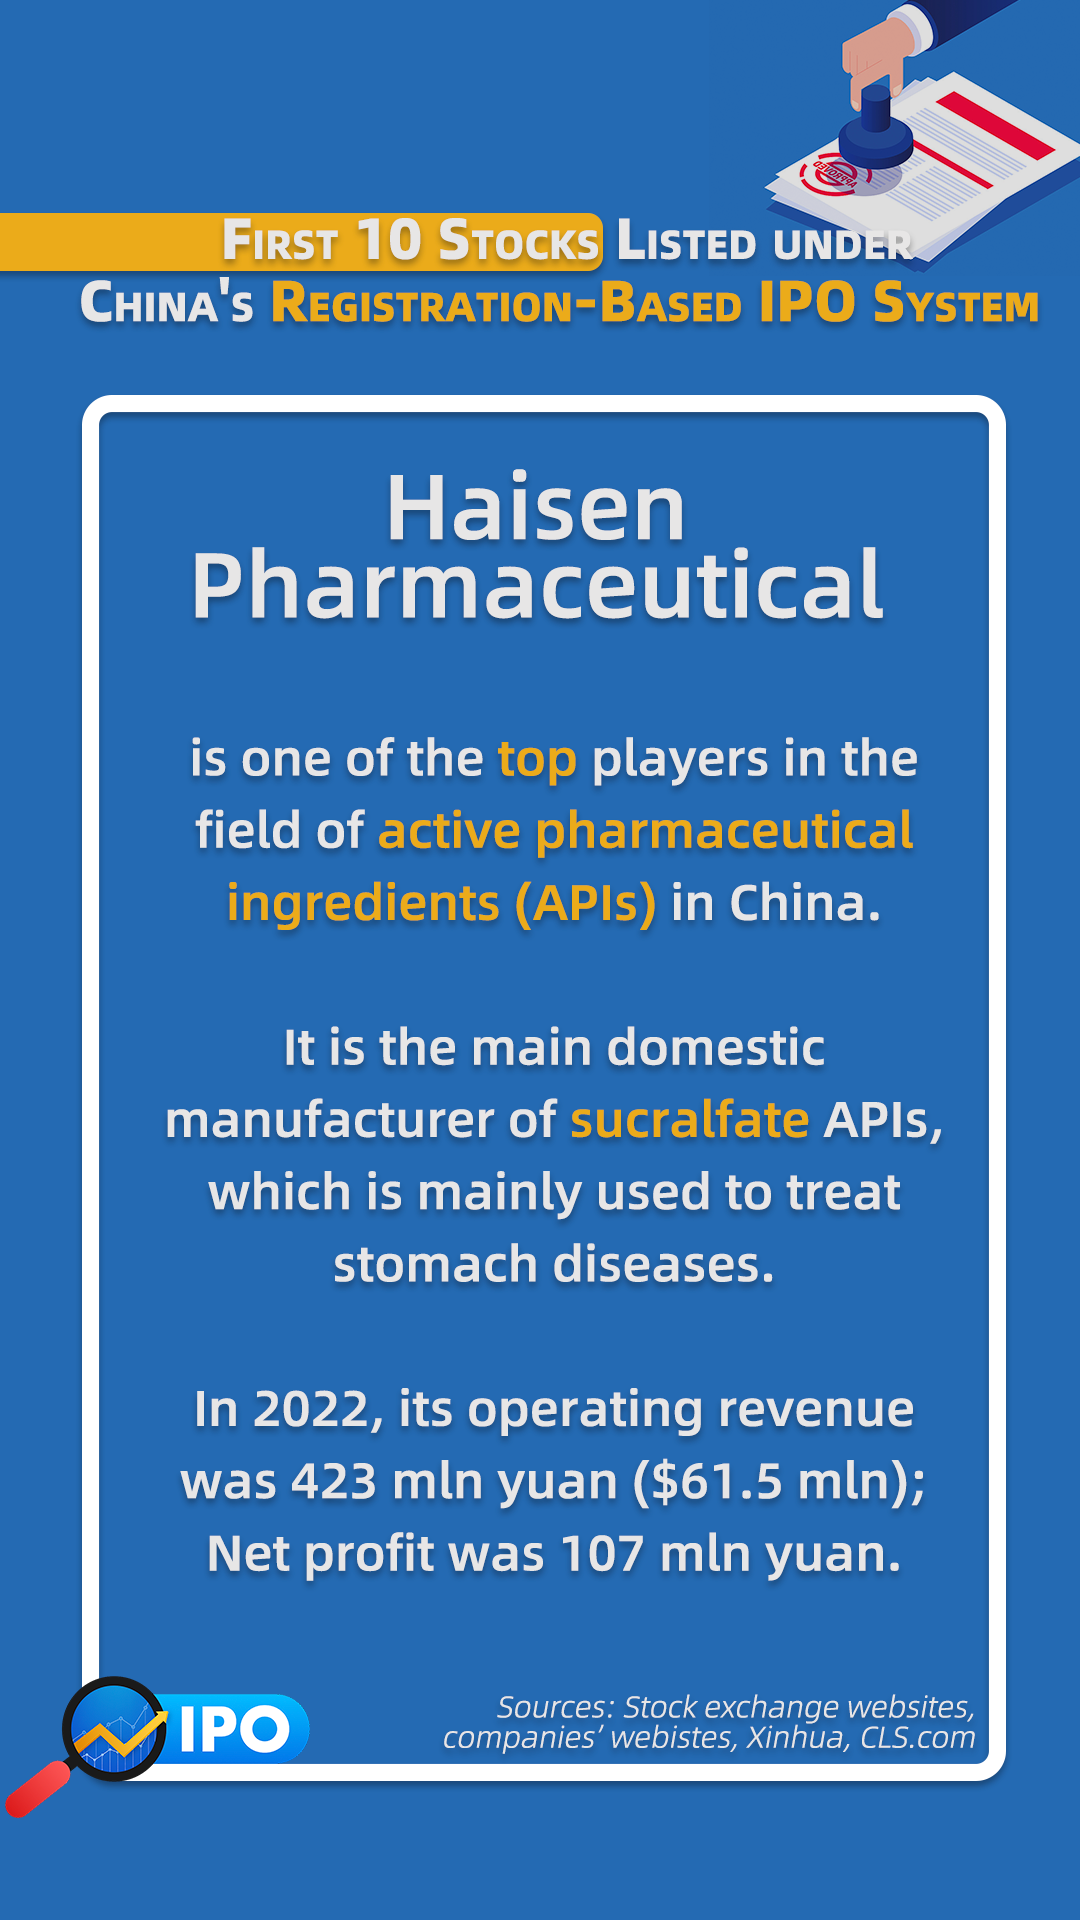 Haisen Pharmaceutical, one of the 10 listed companies